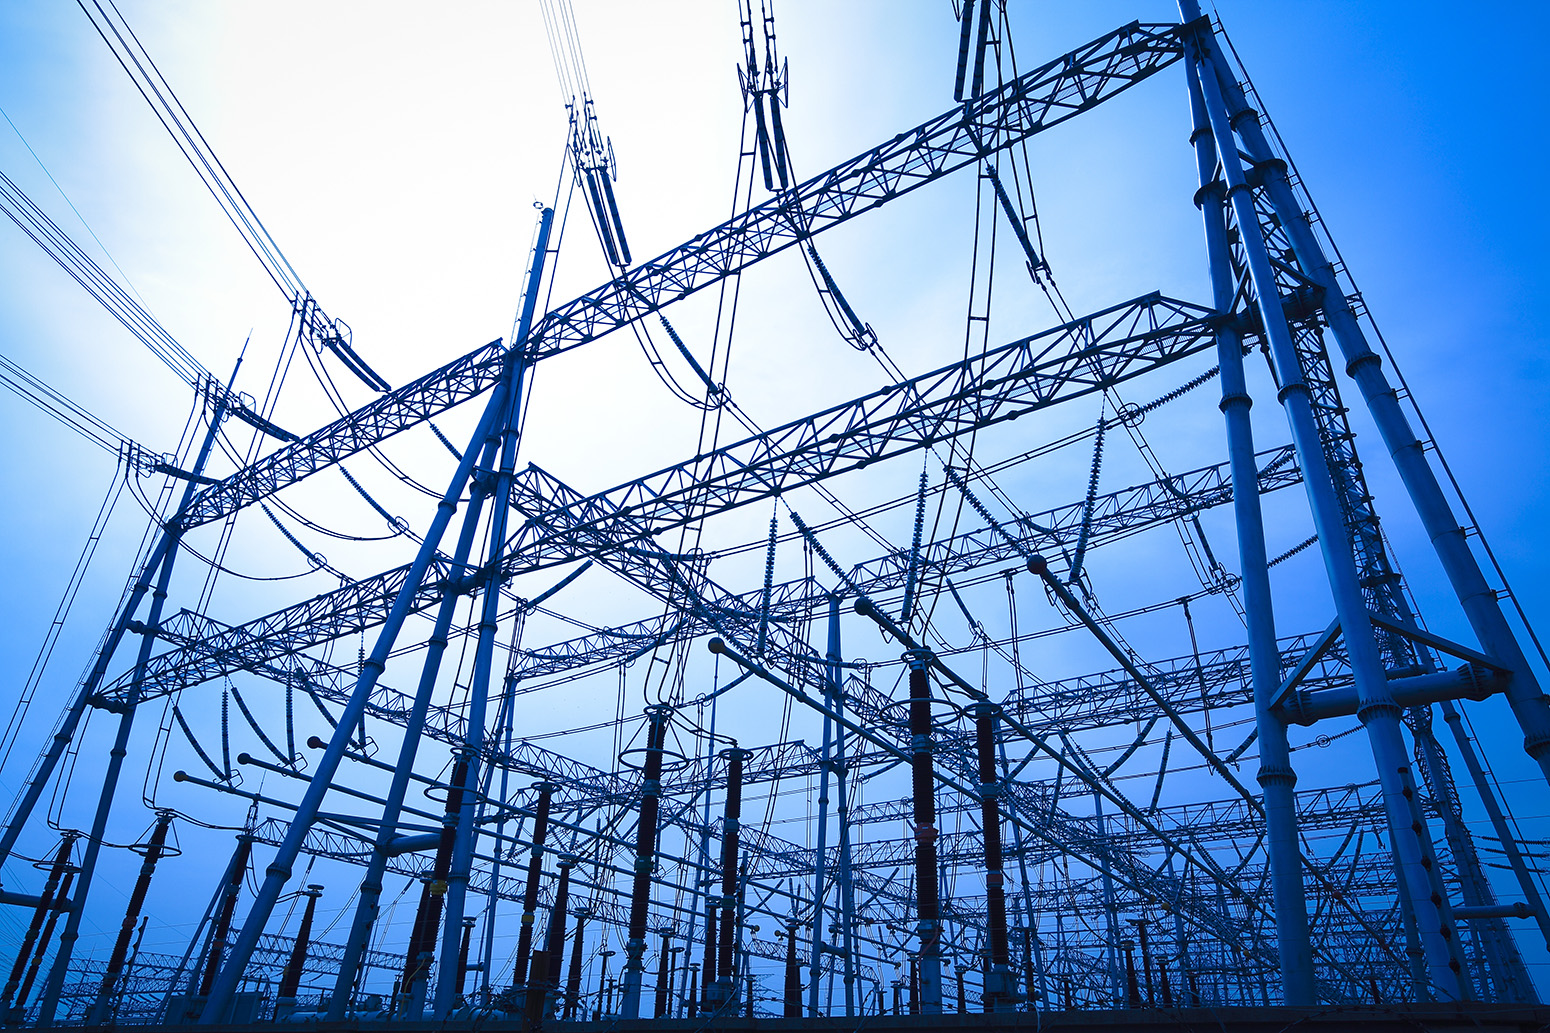 15: Electricity Power Generation, Transmission and Distribution Infrastructure